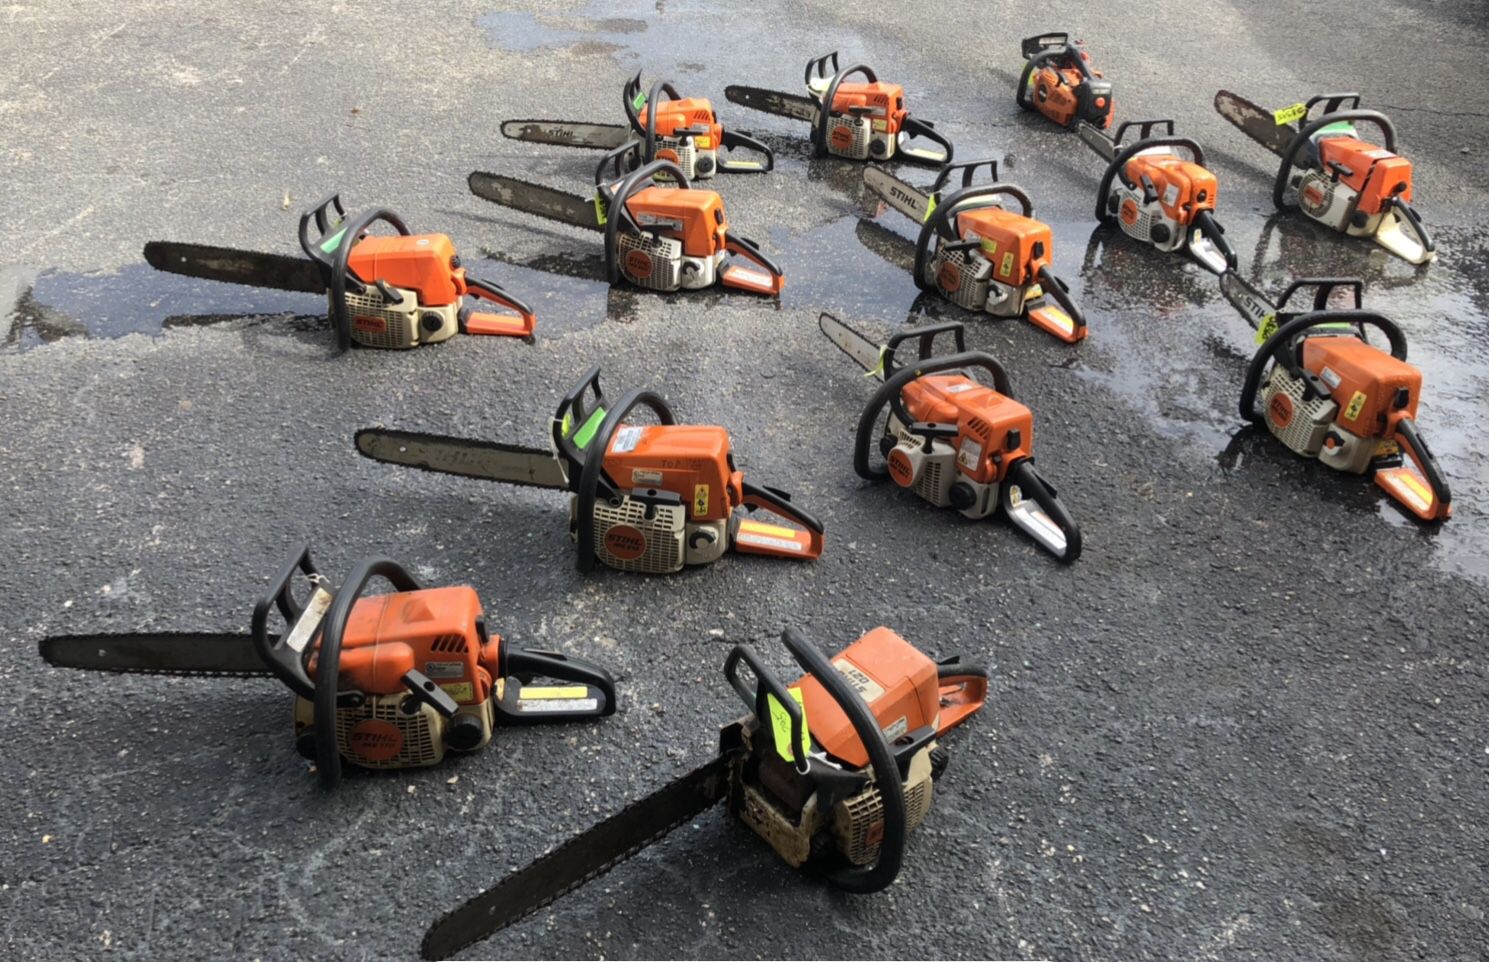 Stihl Chainsaw Sale! Many models and sizes while they last